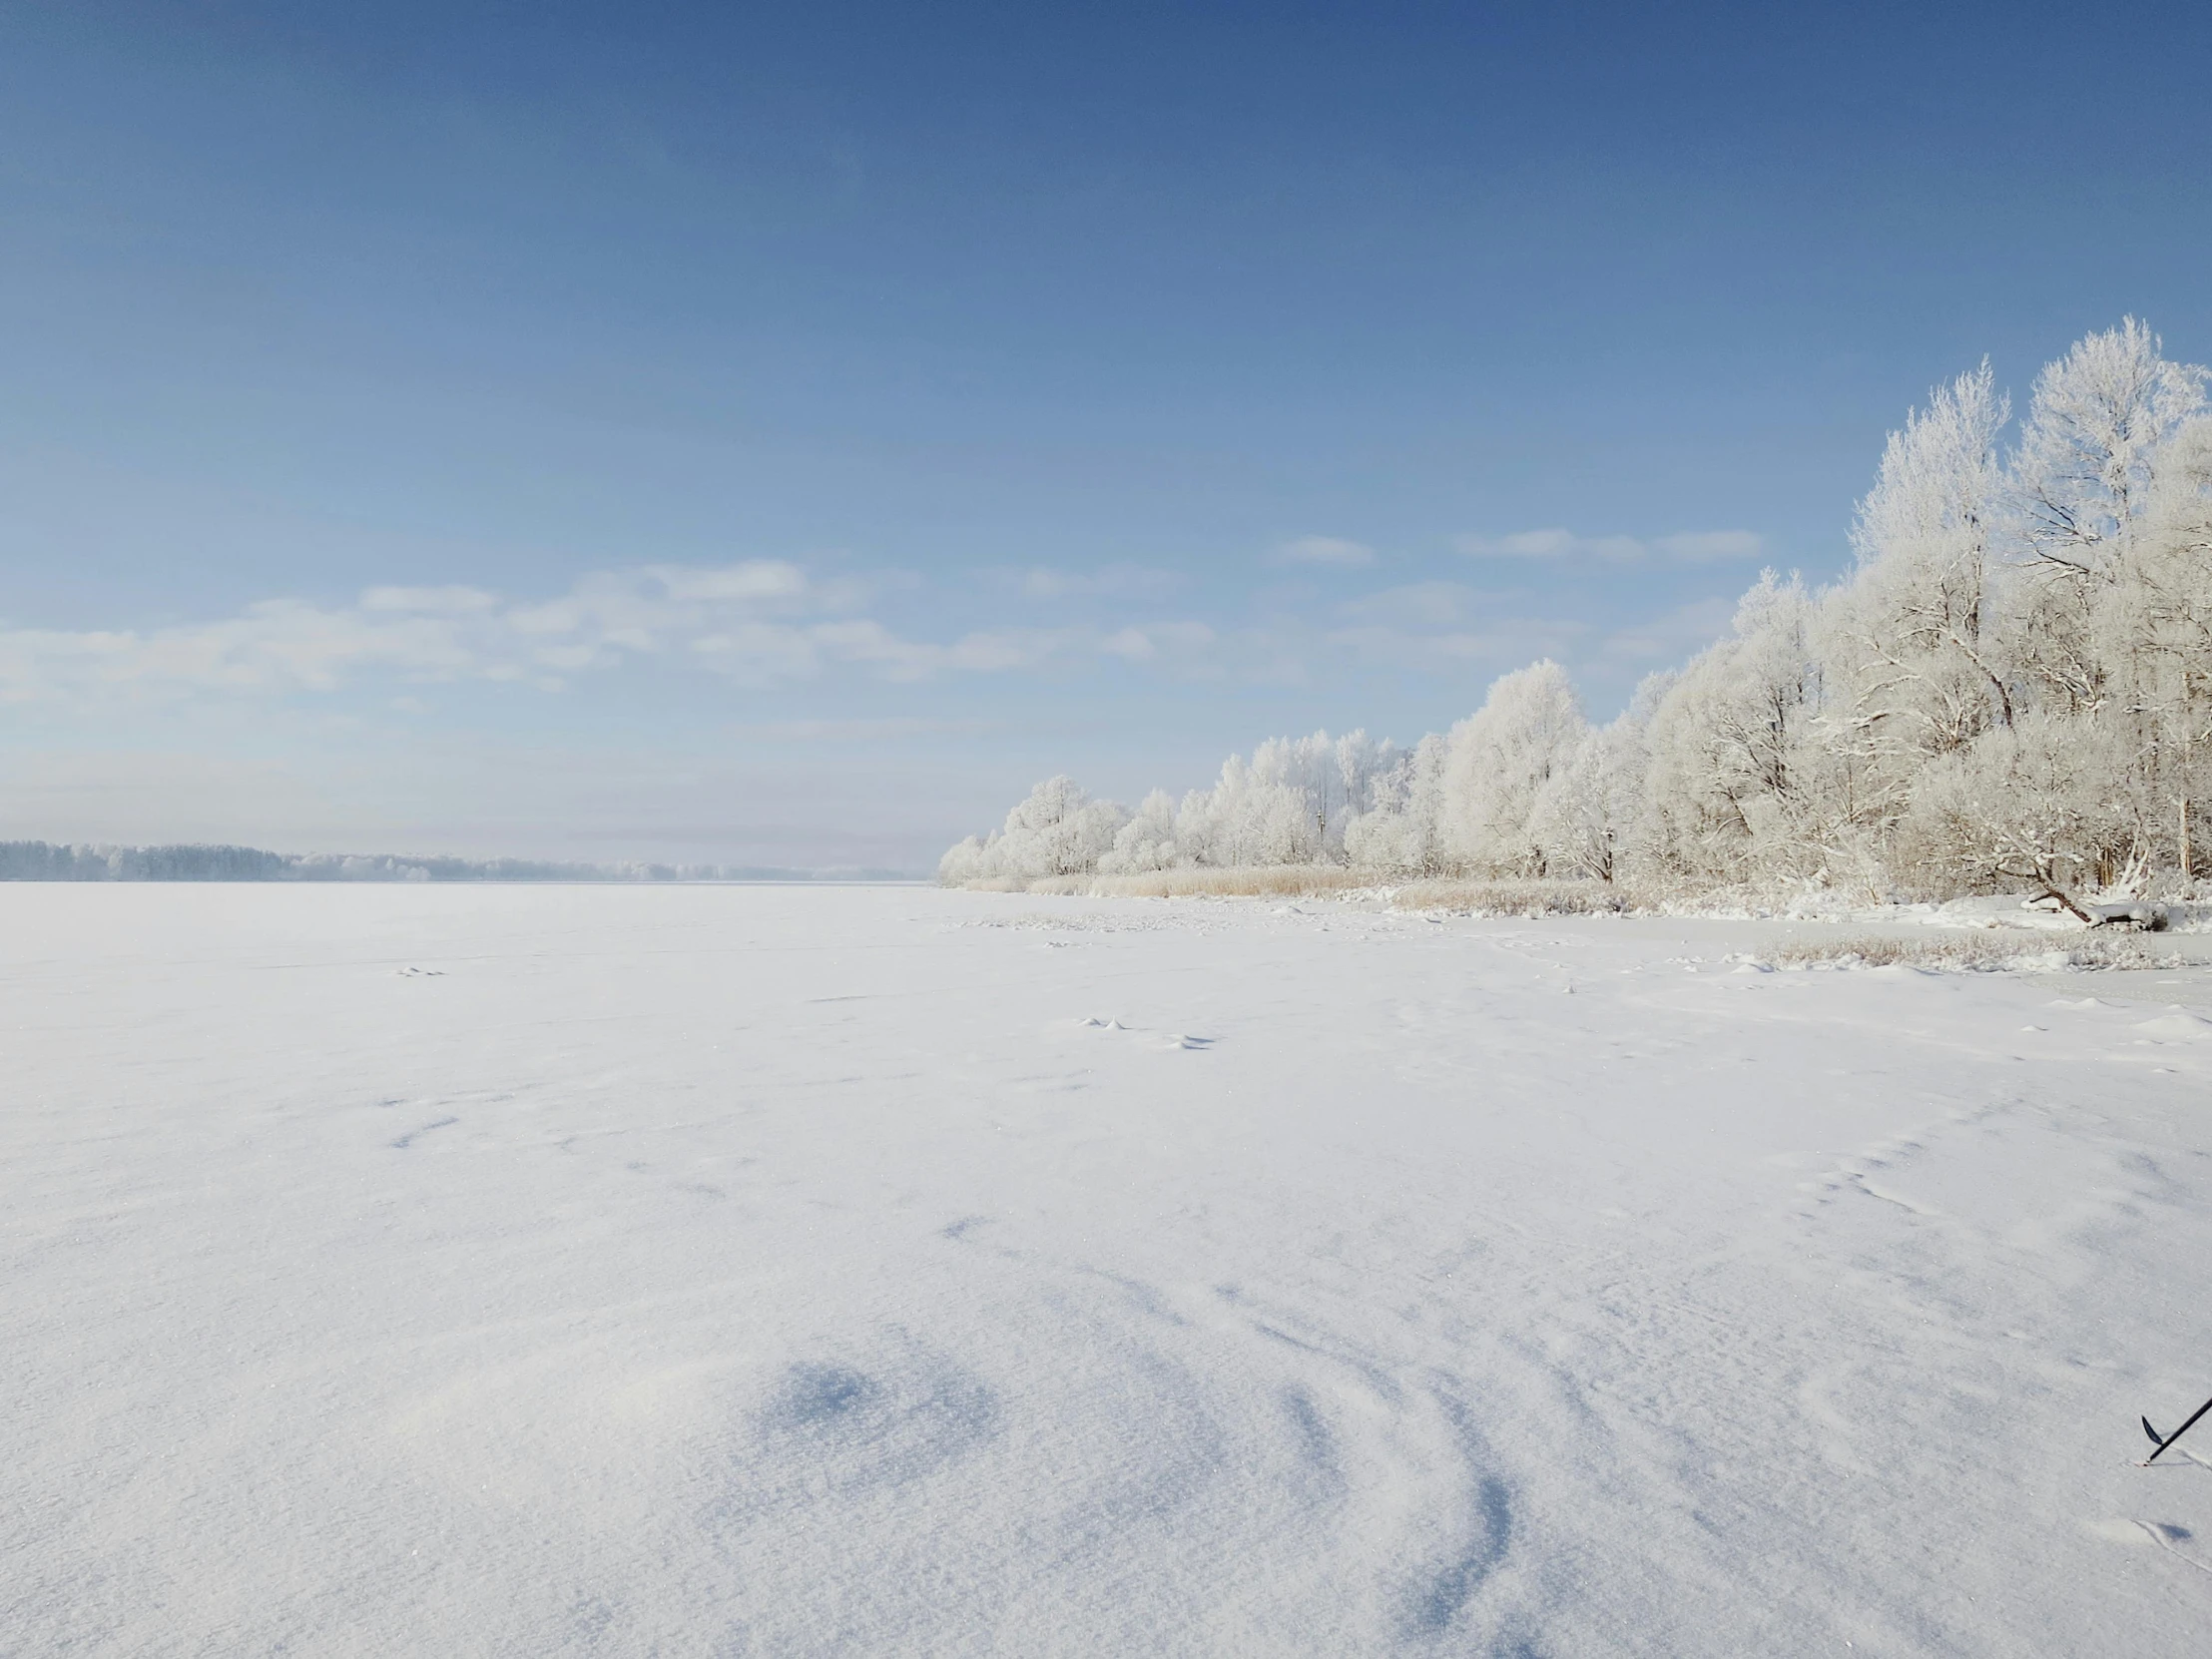 a man riding skis down a snow covered slope, an album cover, inspired by Eero Järnefelt, pexels contest winner, land art, a photo of a lake on a sunny day, trees. wide view, sparse frozen landscape, thumbnail